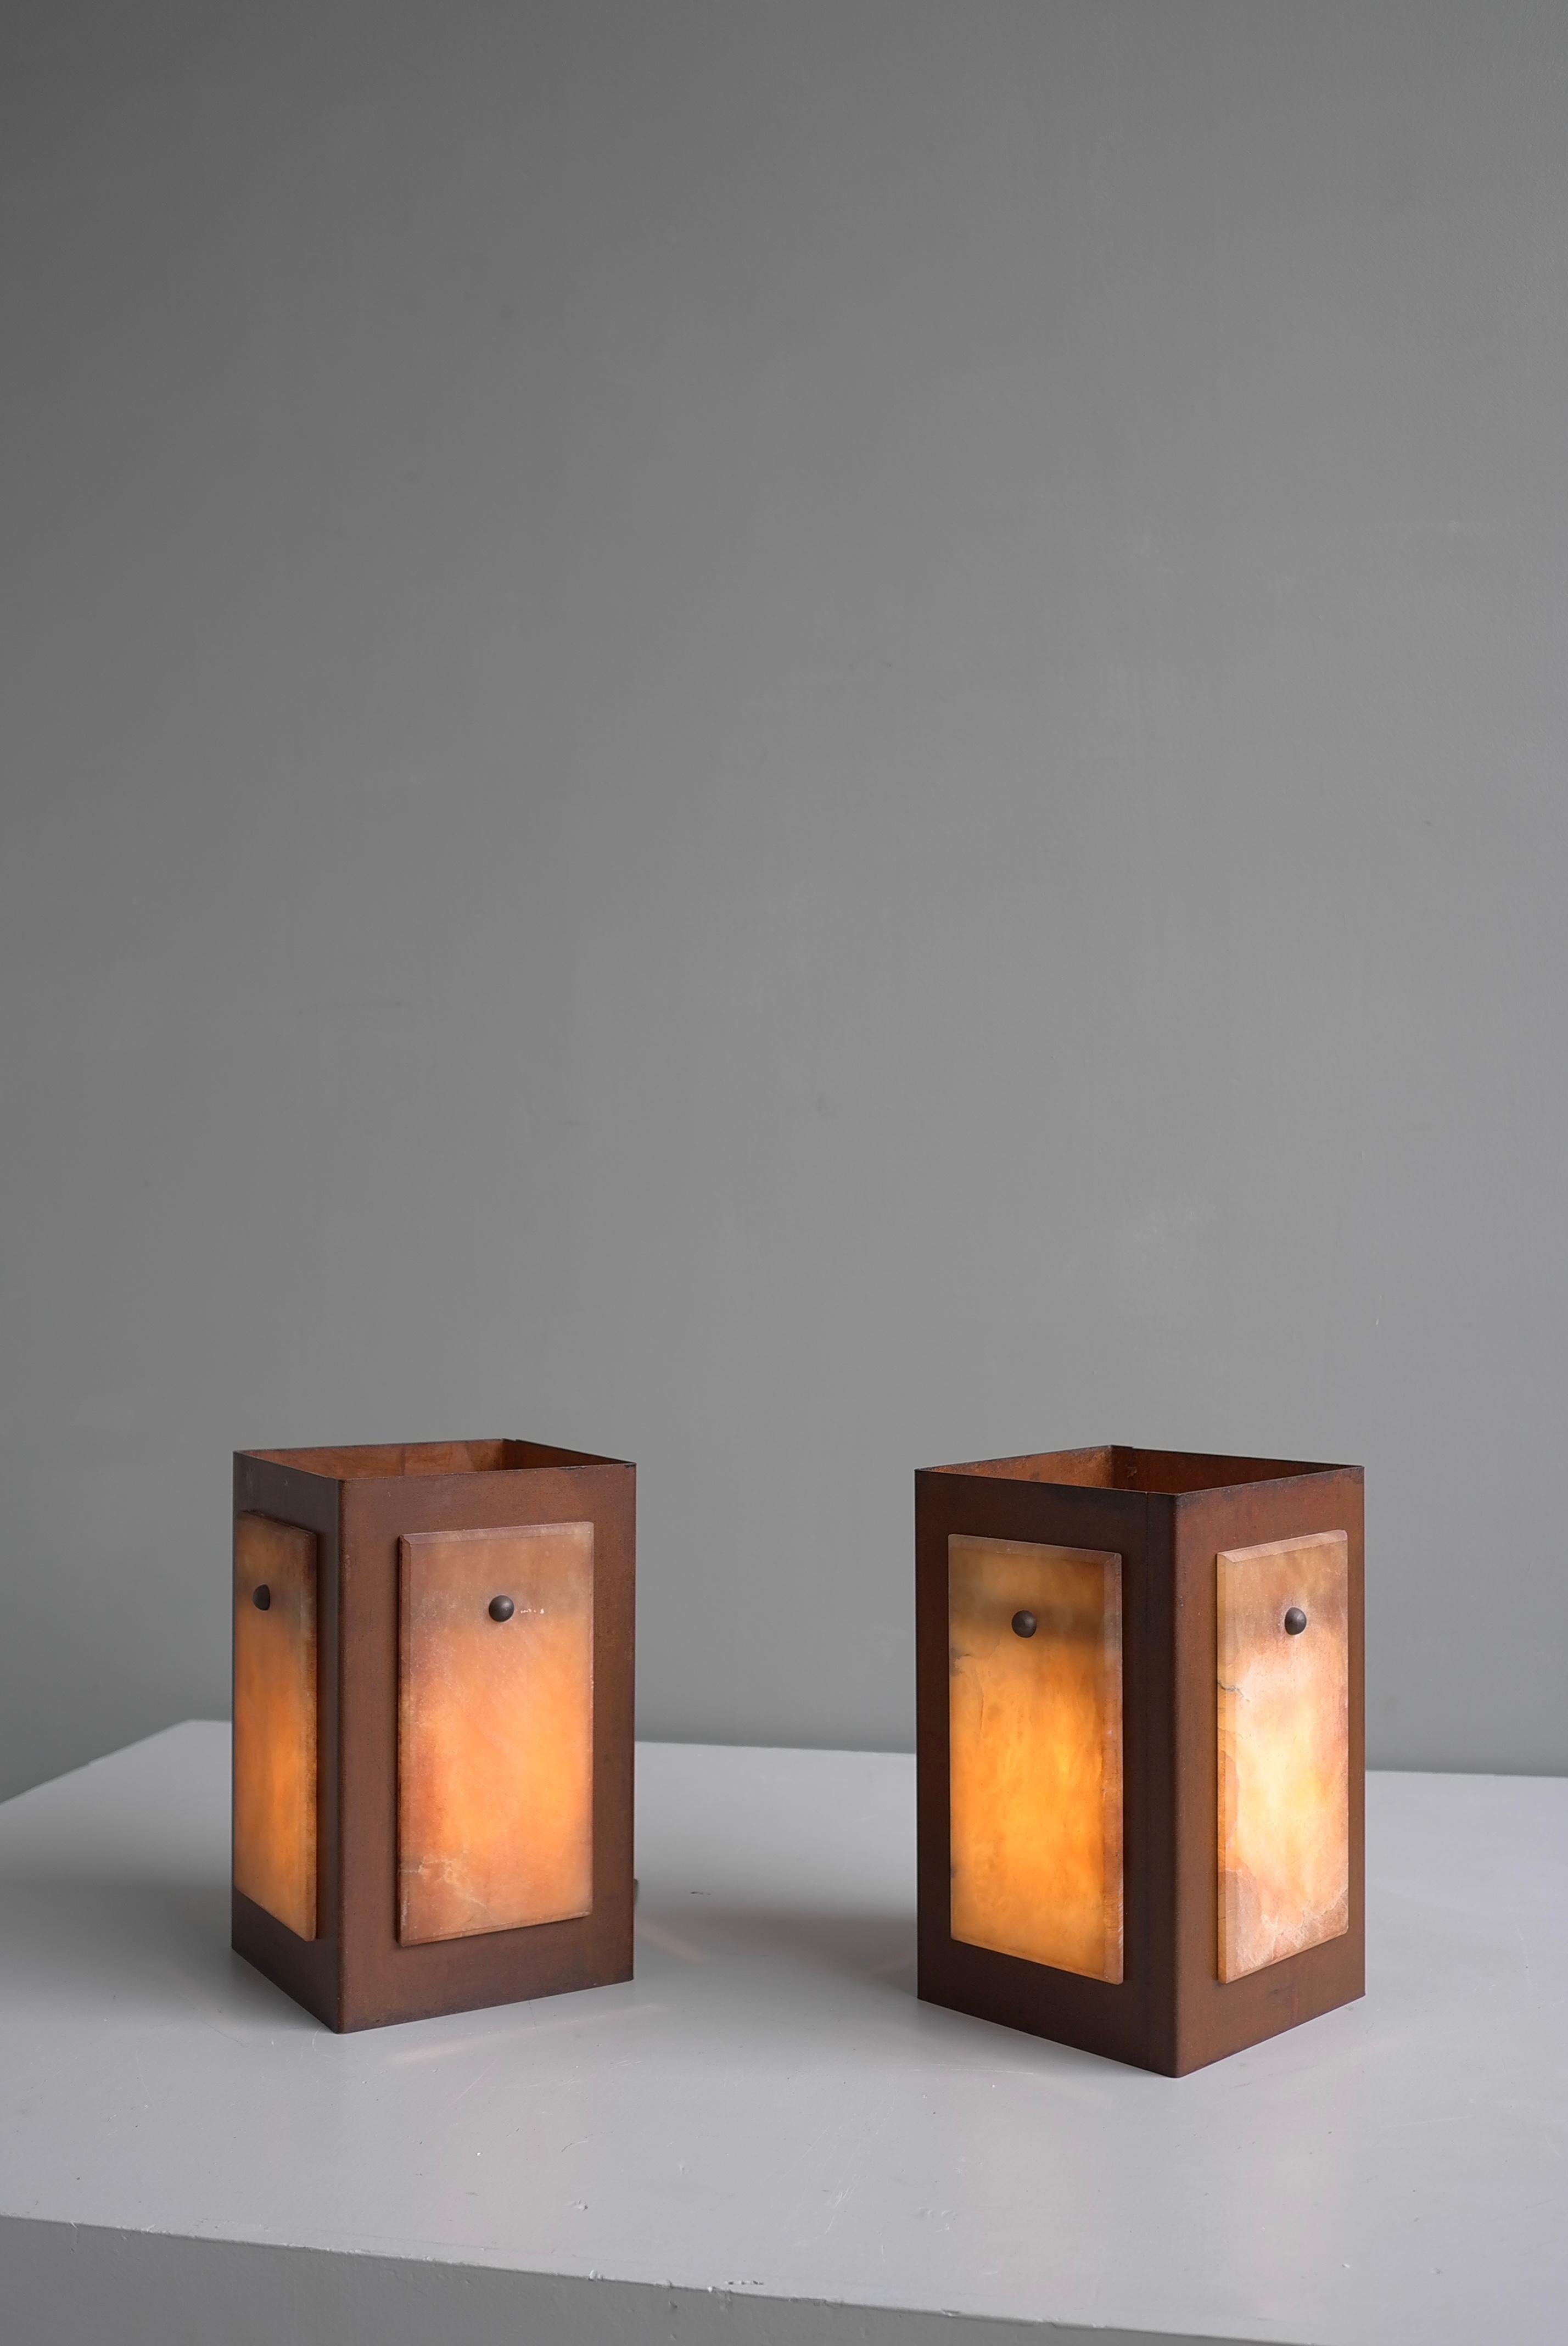 Table Lamps in Alabaster Stone and Rusty Metal, by Pegasam, Spain 1970s For Sale 2